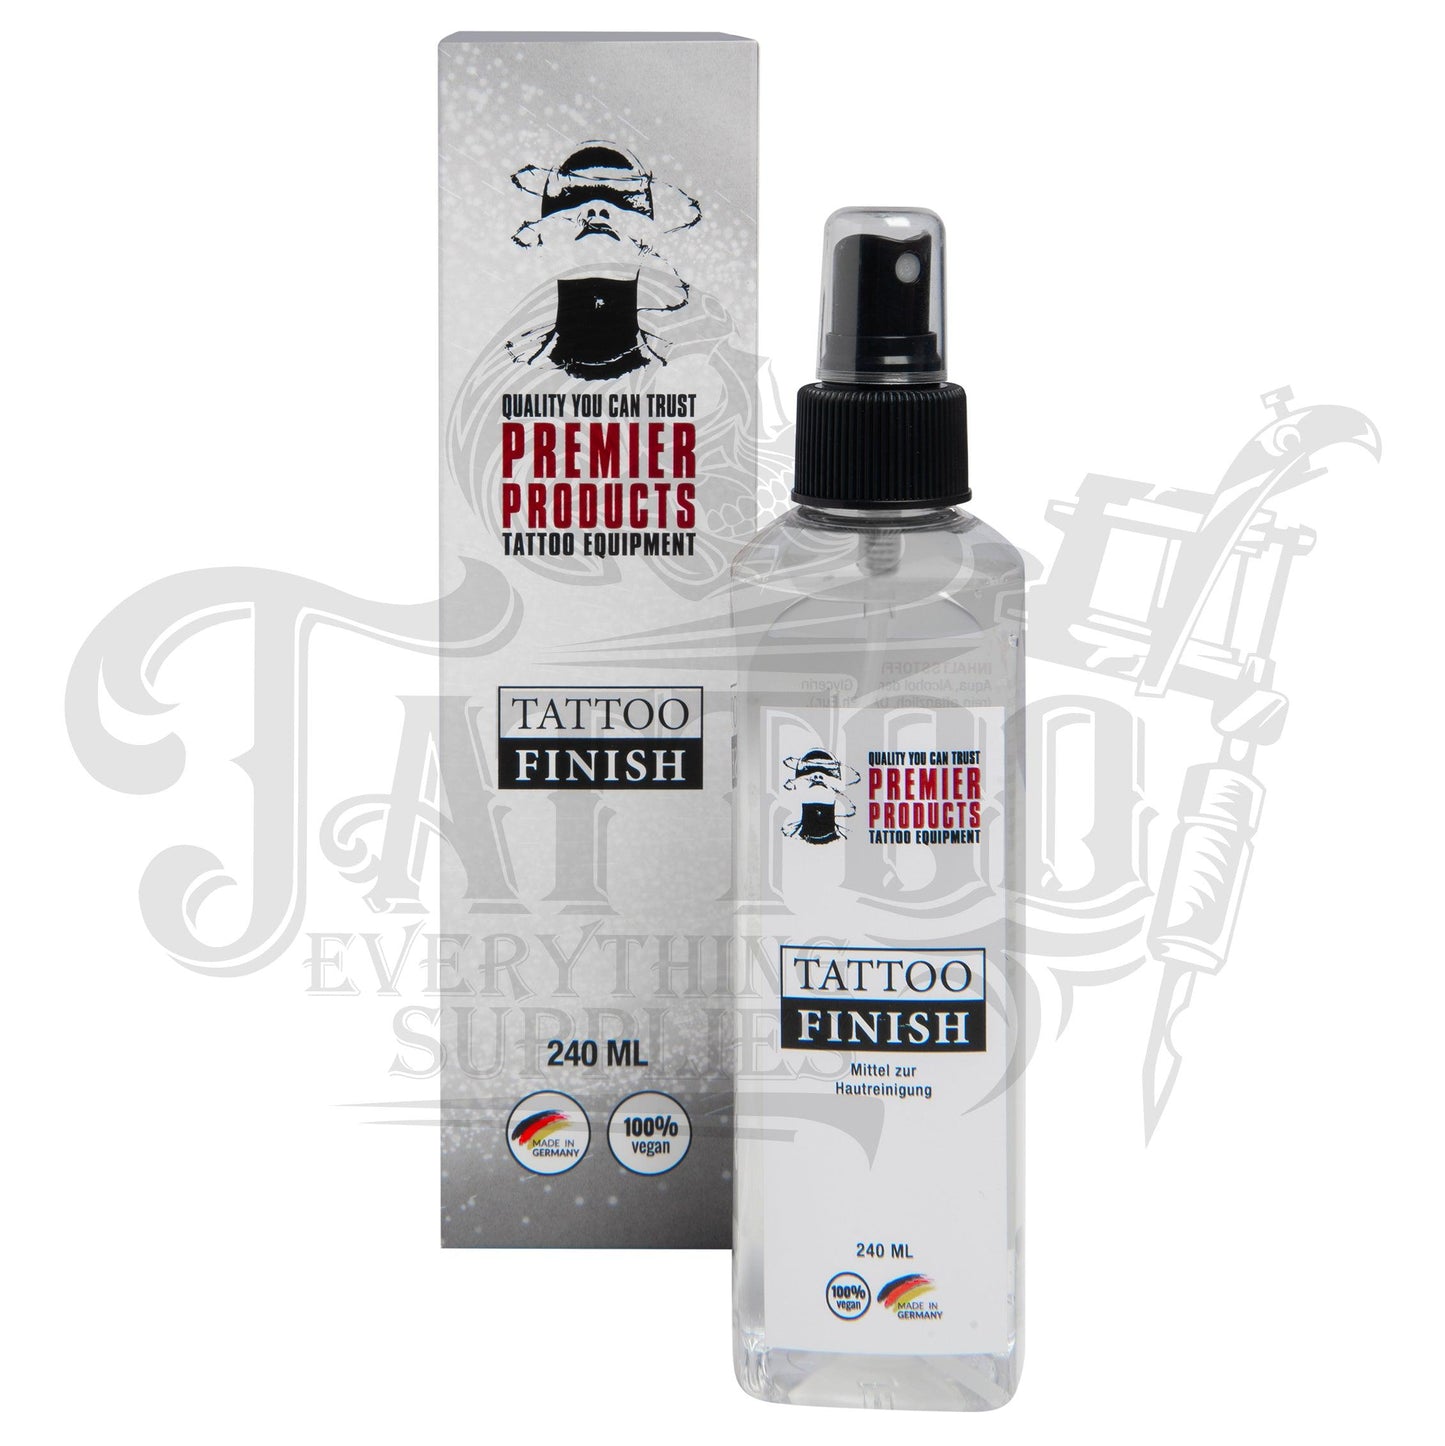 Tattoo Finish From Premier Products 240ml - Tattoo Everything Supplies